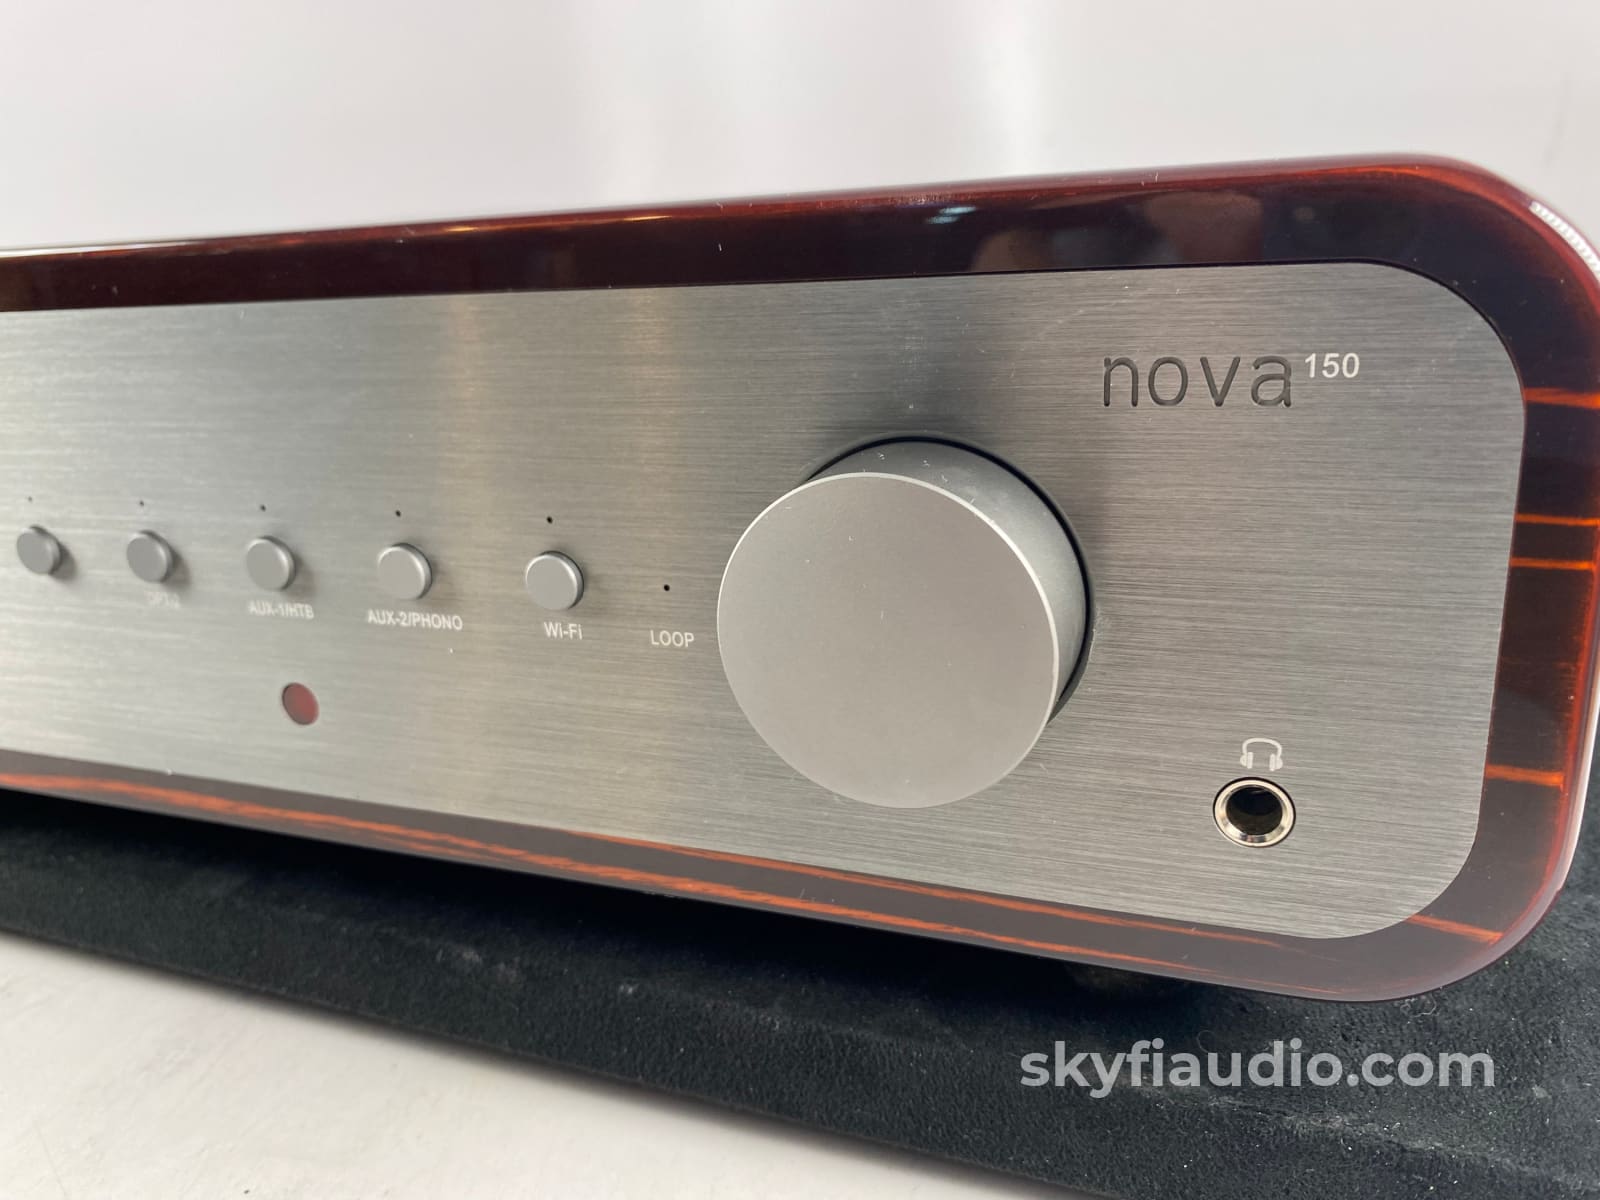 Peachtree Nova150 Integrated Amplifier With Reference Sabre Dac